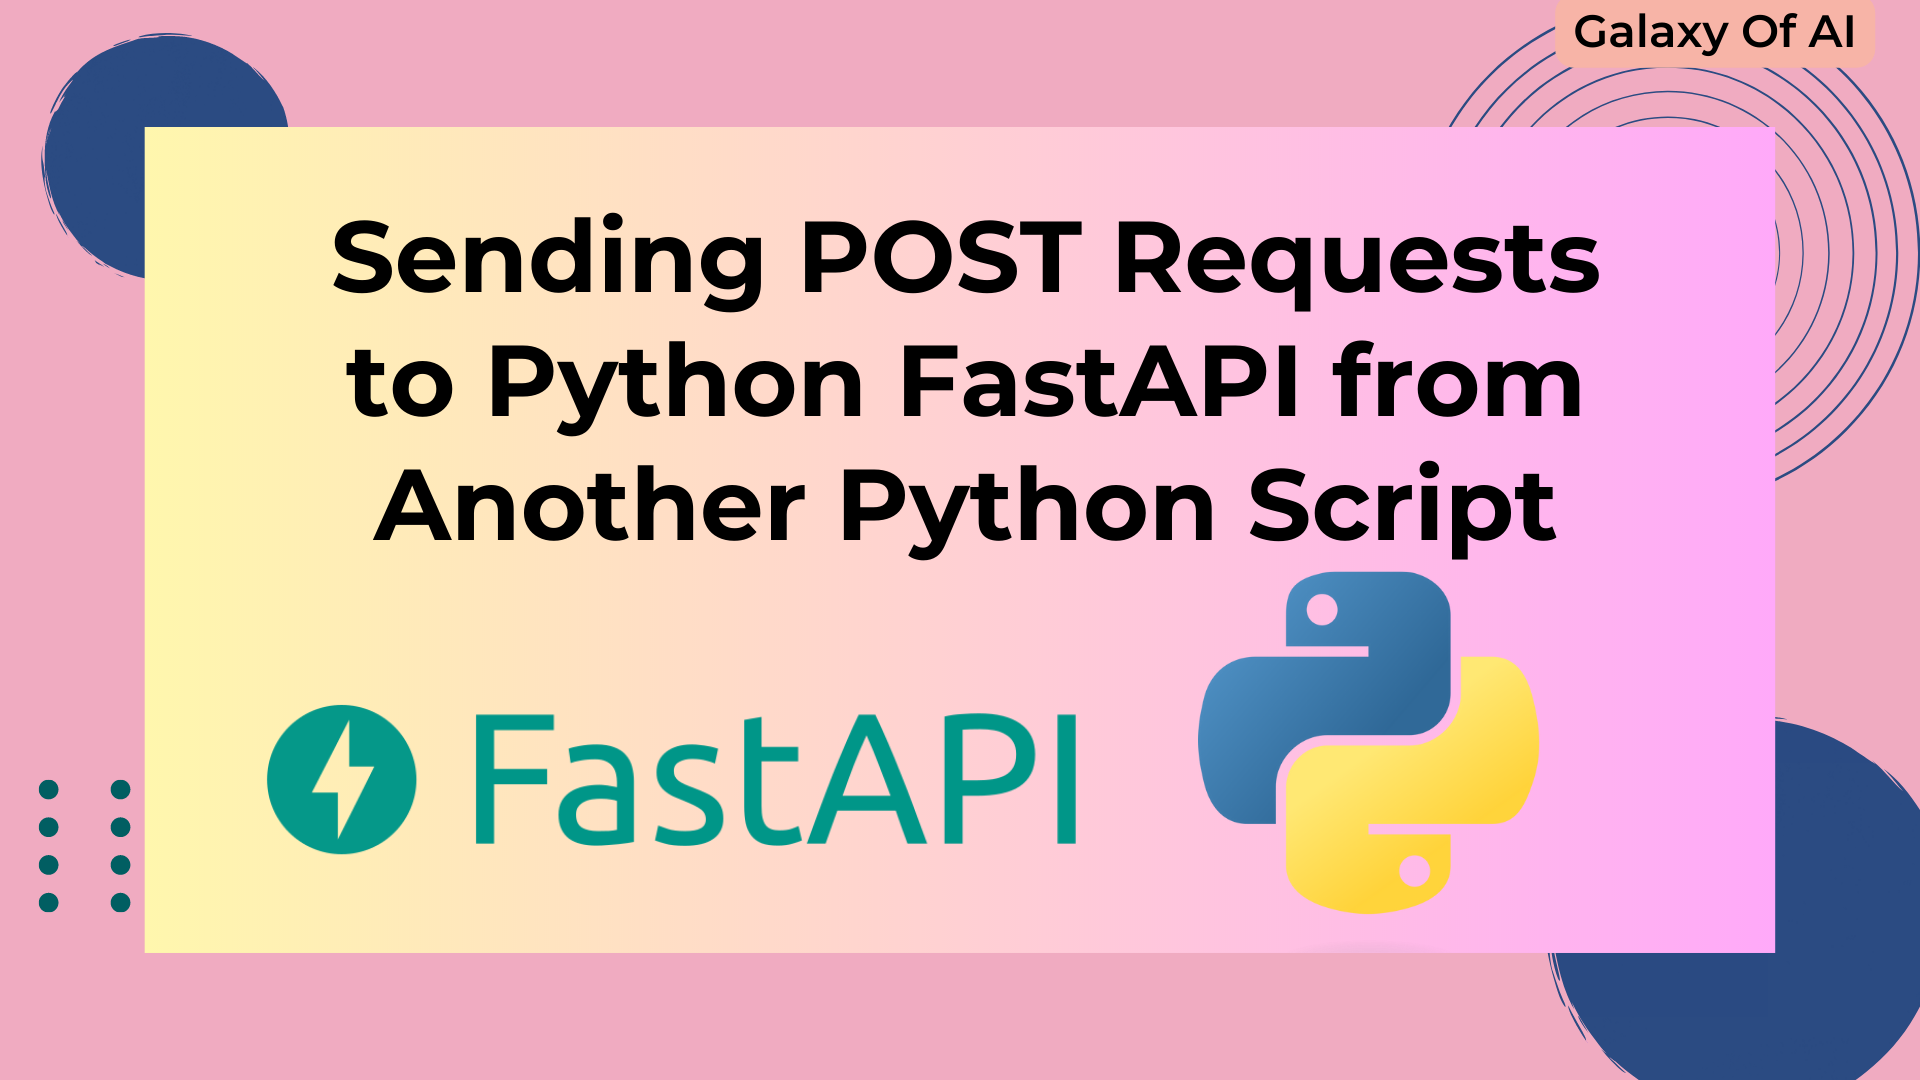 Sending POST Requests to Python FastAPI from Another Python Script